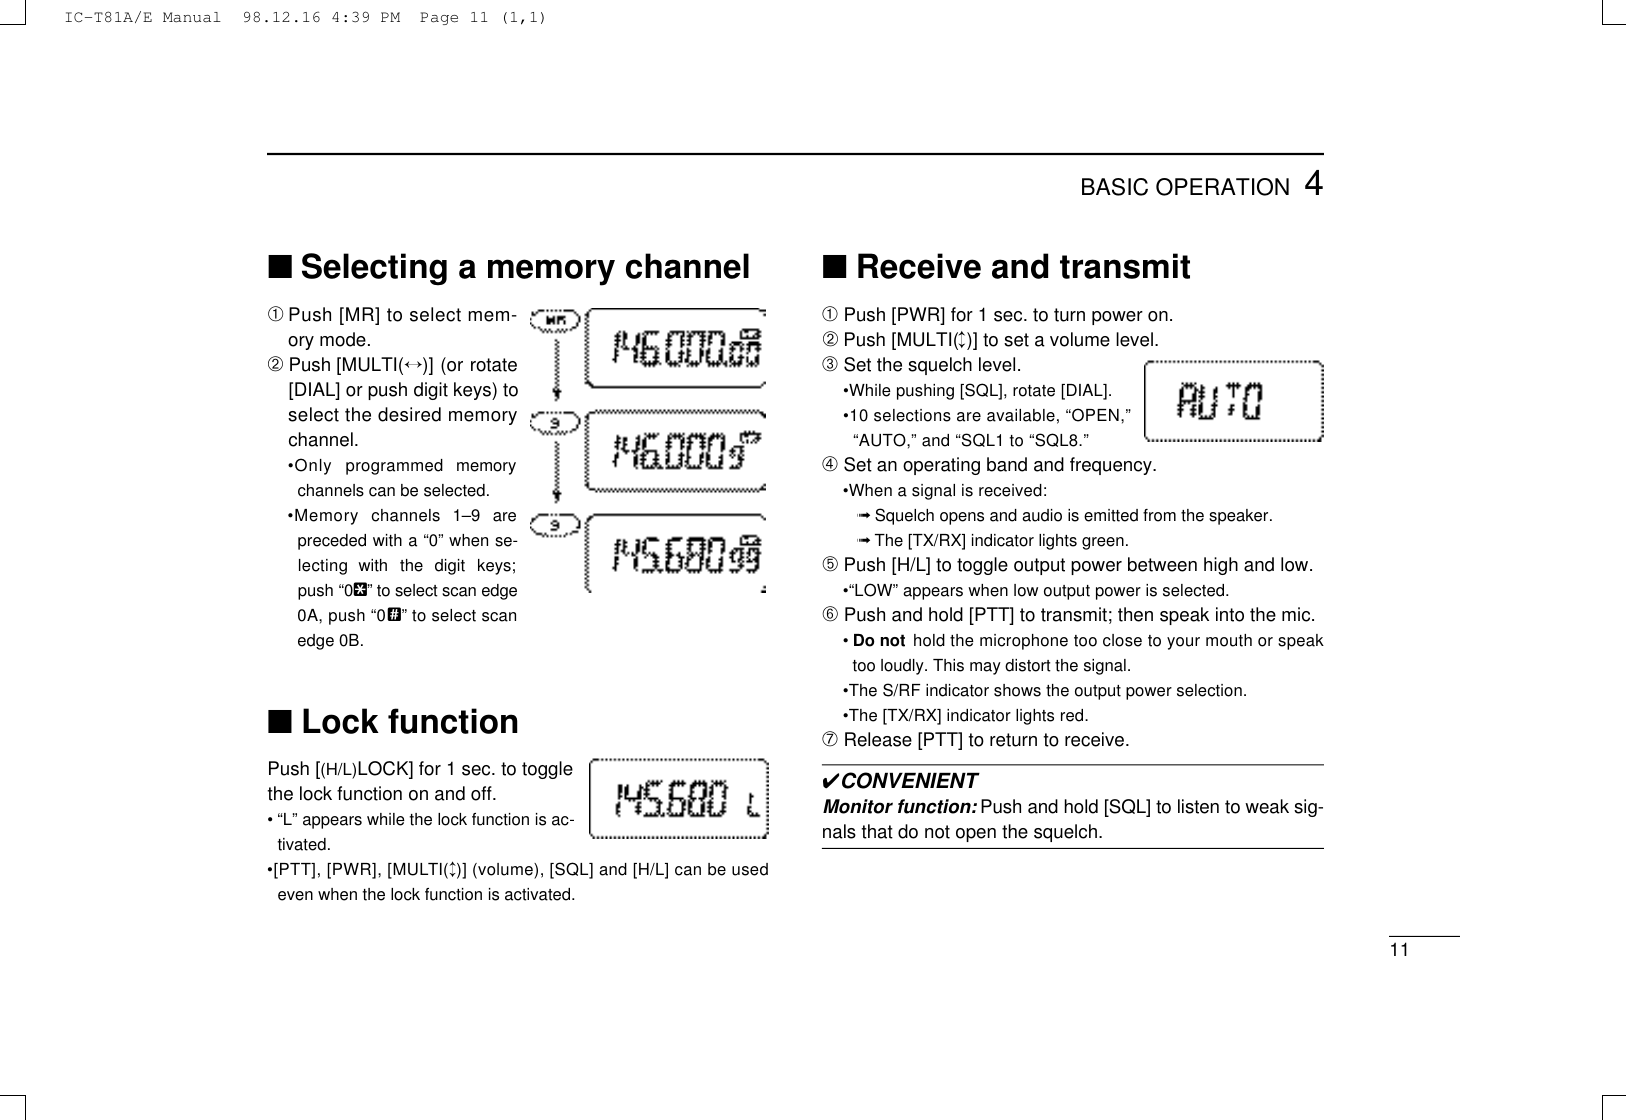 114BASIC OPERATION■Selecting a memory channel➀Push [MR] to select mem-ory mode.➁Push [MULTI(↔)] (or rotate[DIAL] or push digit keys) toselect the desired memorychannel.•Only  programmed  memorychannels can be selected.•Memory  channels  1–9  arepreceded with a “0” when se-lecting  with  the  digit  keys;push “0@” to select scan edge0A, push “0?” to select scanedge 0B.■Lock functionPush [(H/L)LOCK] for 1 sec. to togglethe lock function on and off.• “L” appears while the lock function is ac-tivated.•[PTT], [PWR], [MULT I (↕)] (volume), [SQL] and [H/L] can be usedeven when the lock function is activated.■Receive and transmit➀Push [PWR] for 1 sec. to turn power on.➁Push [MULTI(↕)] to set a volume level.➂Set the squelch level.•While pushing [SQL], rotate [DIAL].•10 selections are available, “OPEN,”“AUTO,” and “SQL1 to “SQL8.”➃Set an operating band and frequency.•When a signal is received:➟Squelch opens and audio is emitted from the speaker.➟The [TX/RX] indicator lights green.➄Push [H/L] to toggle output power between high and low.•“LOW” appears when low output power is selected.➅Push and hold [PTT] to transmit; then speak into the mic.•Do not hold the microphone too close to your mouth or speaktoo loudly. This may distort the signal.•The S/RF indicator shows the output power selection.•The [TX/RX] indicator lights red.➆Release [PTT] to return to receive.✔CONVENIENTMonitor function: Push and hold [SQL] to listen to weak sig-nals that do not open the squelch.IC-T81A/E Manual  98.12.16 4:39 PM  Page 11 (1,1)